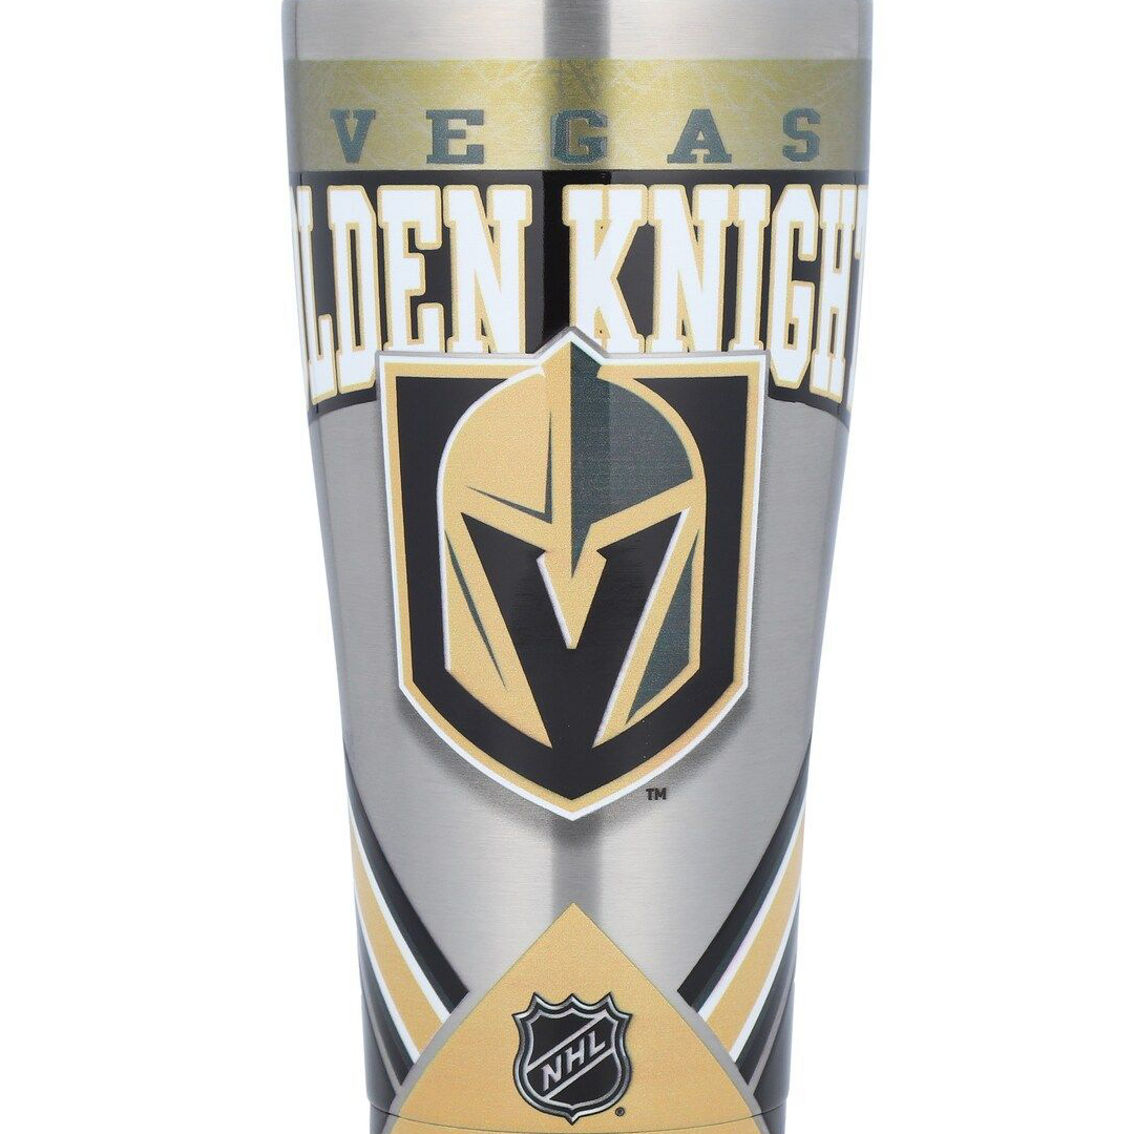 Tervis Vegas Golden Knights 30oz. Ice Stainless Steel Tumbler - Image 2 of 3